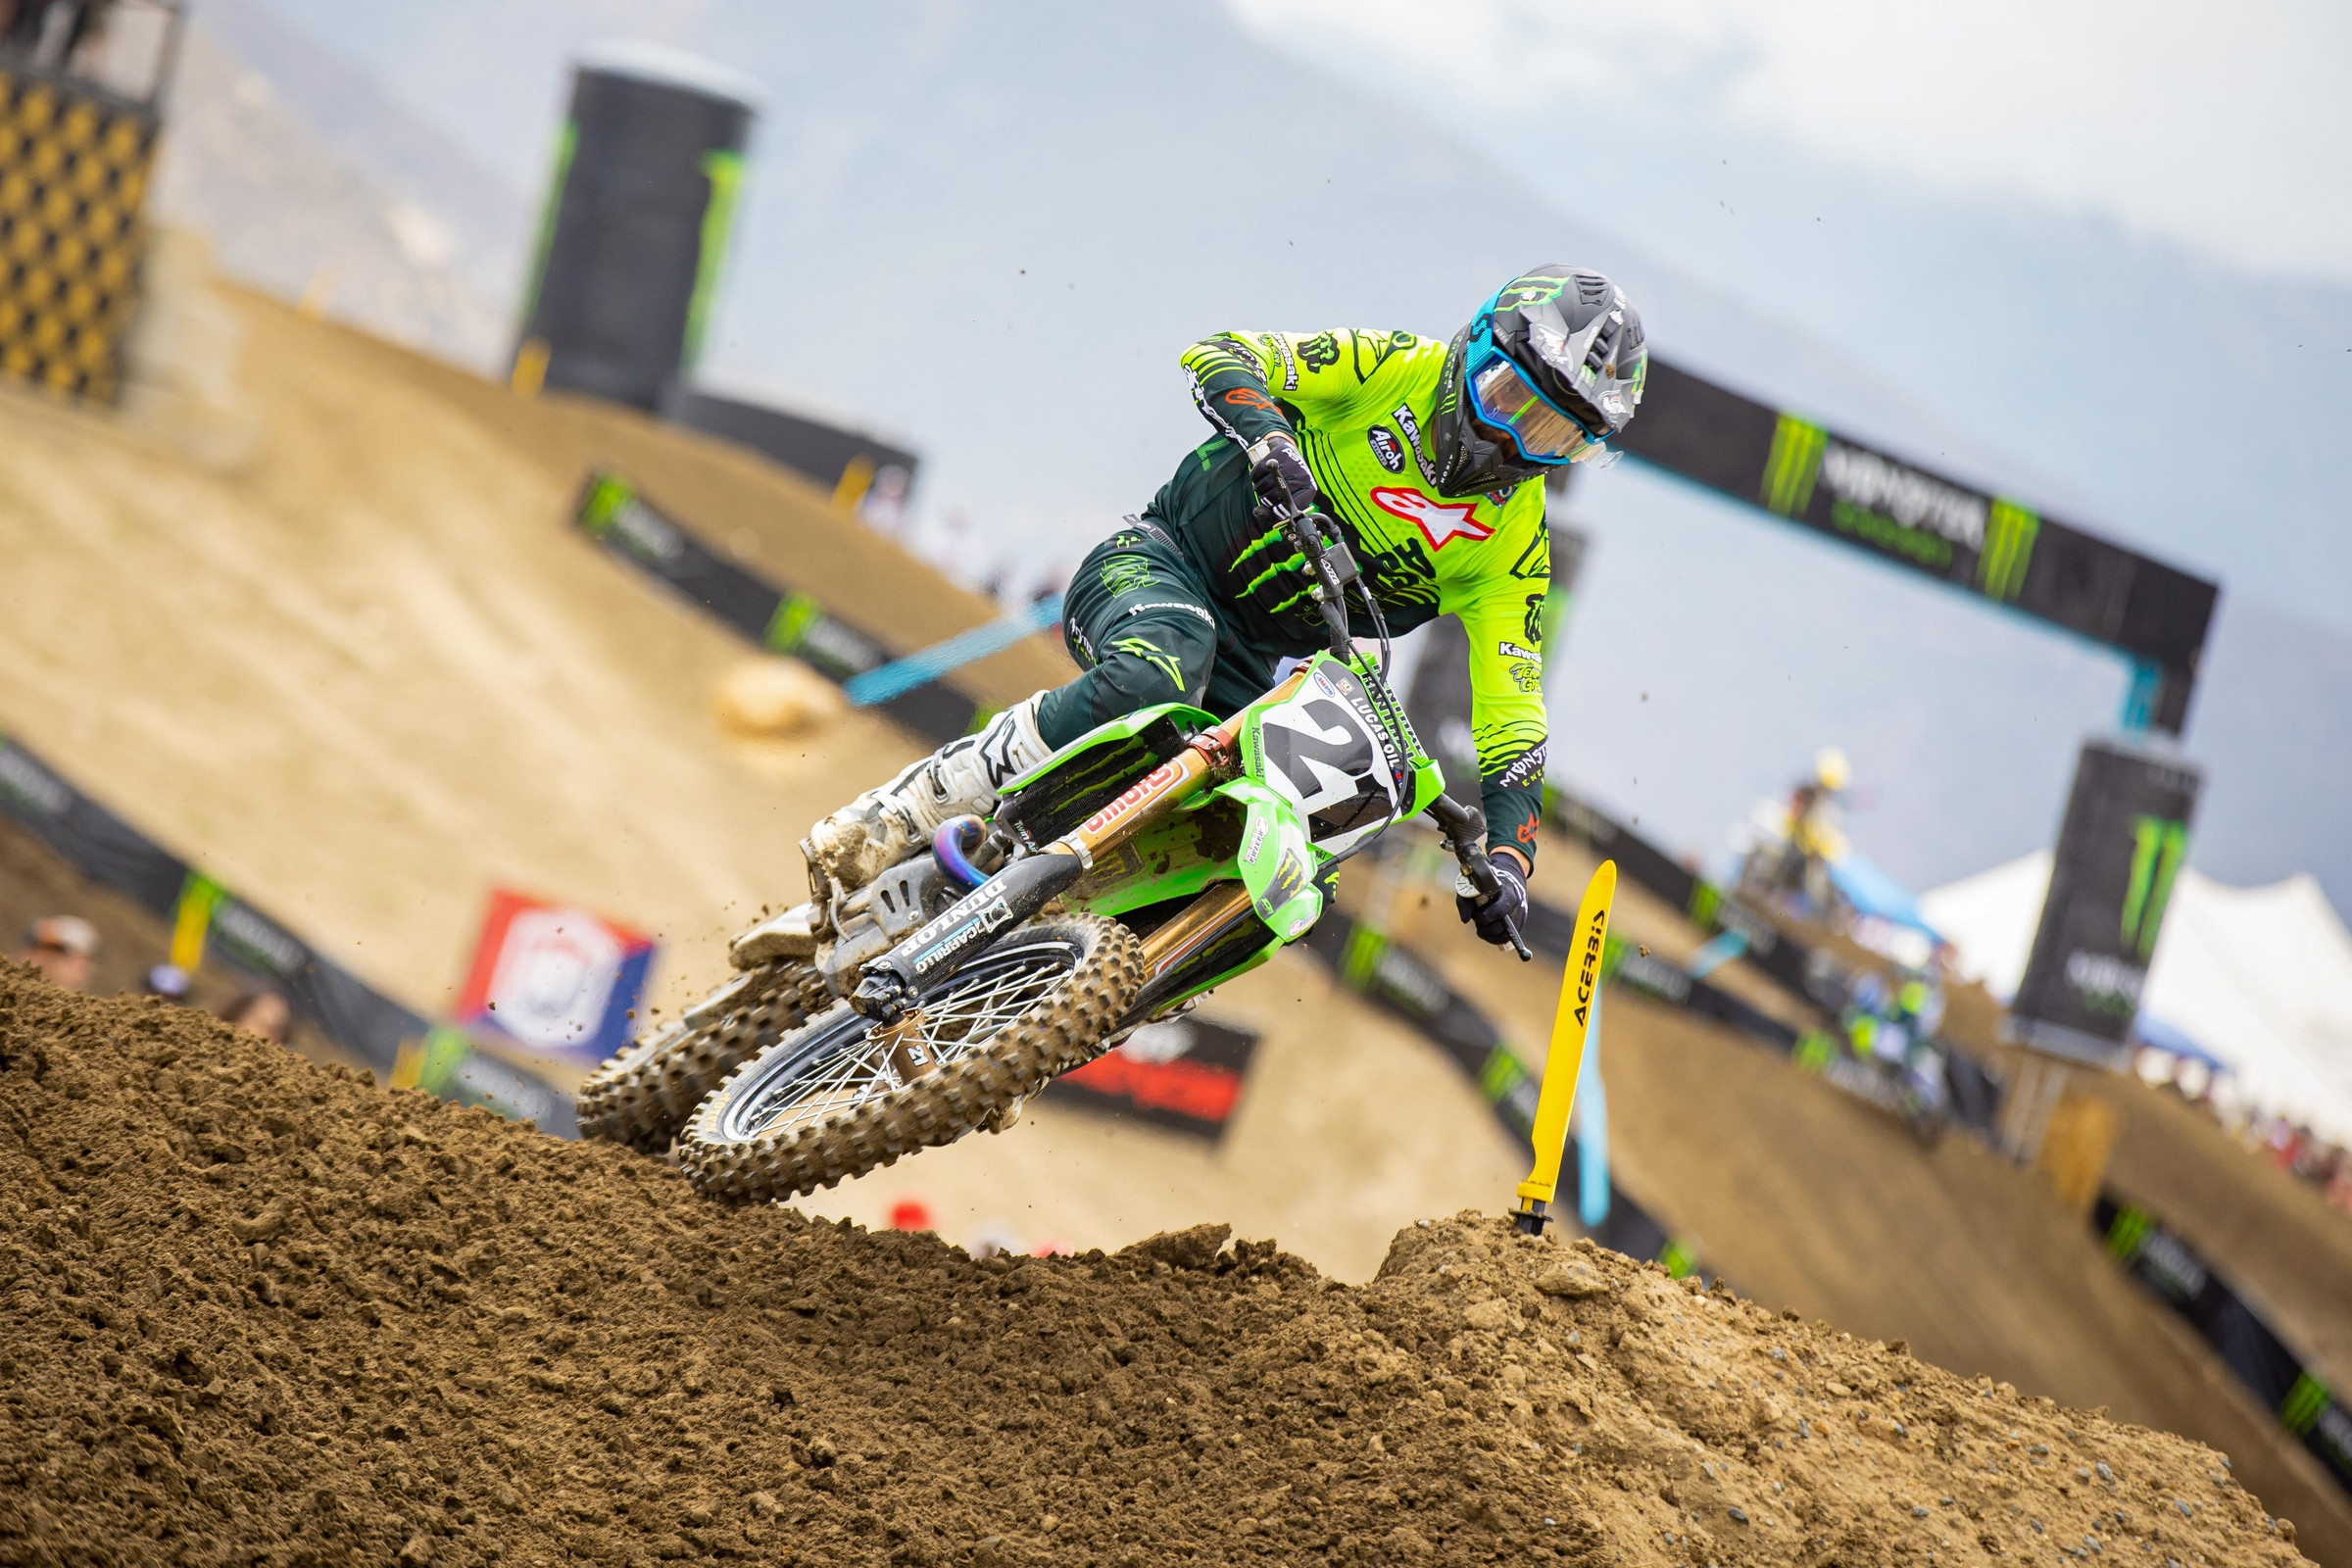 How to Watch/Stream Thunder Valley and MXGP of Germany on TV